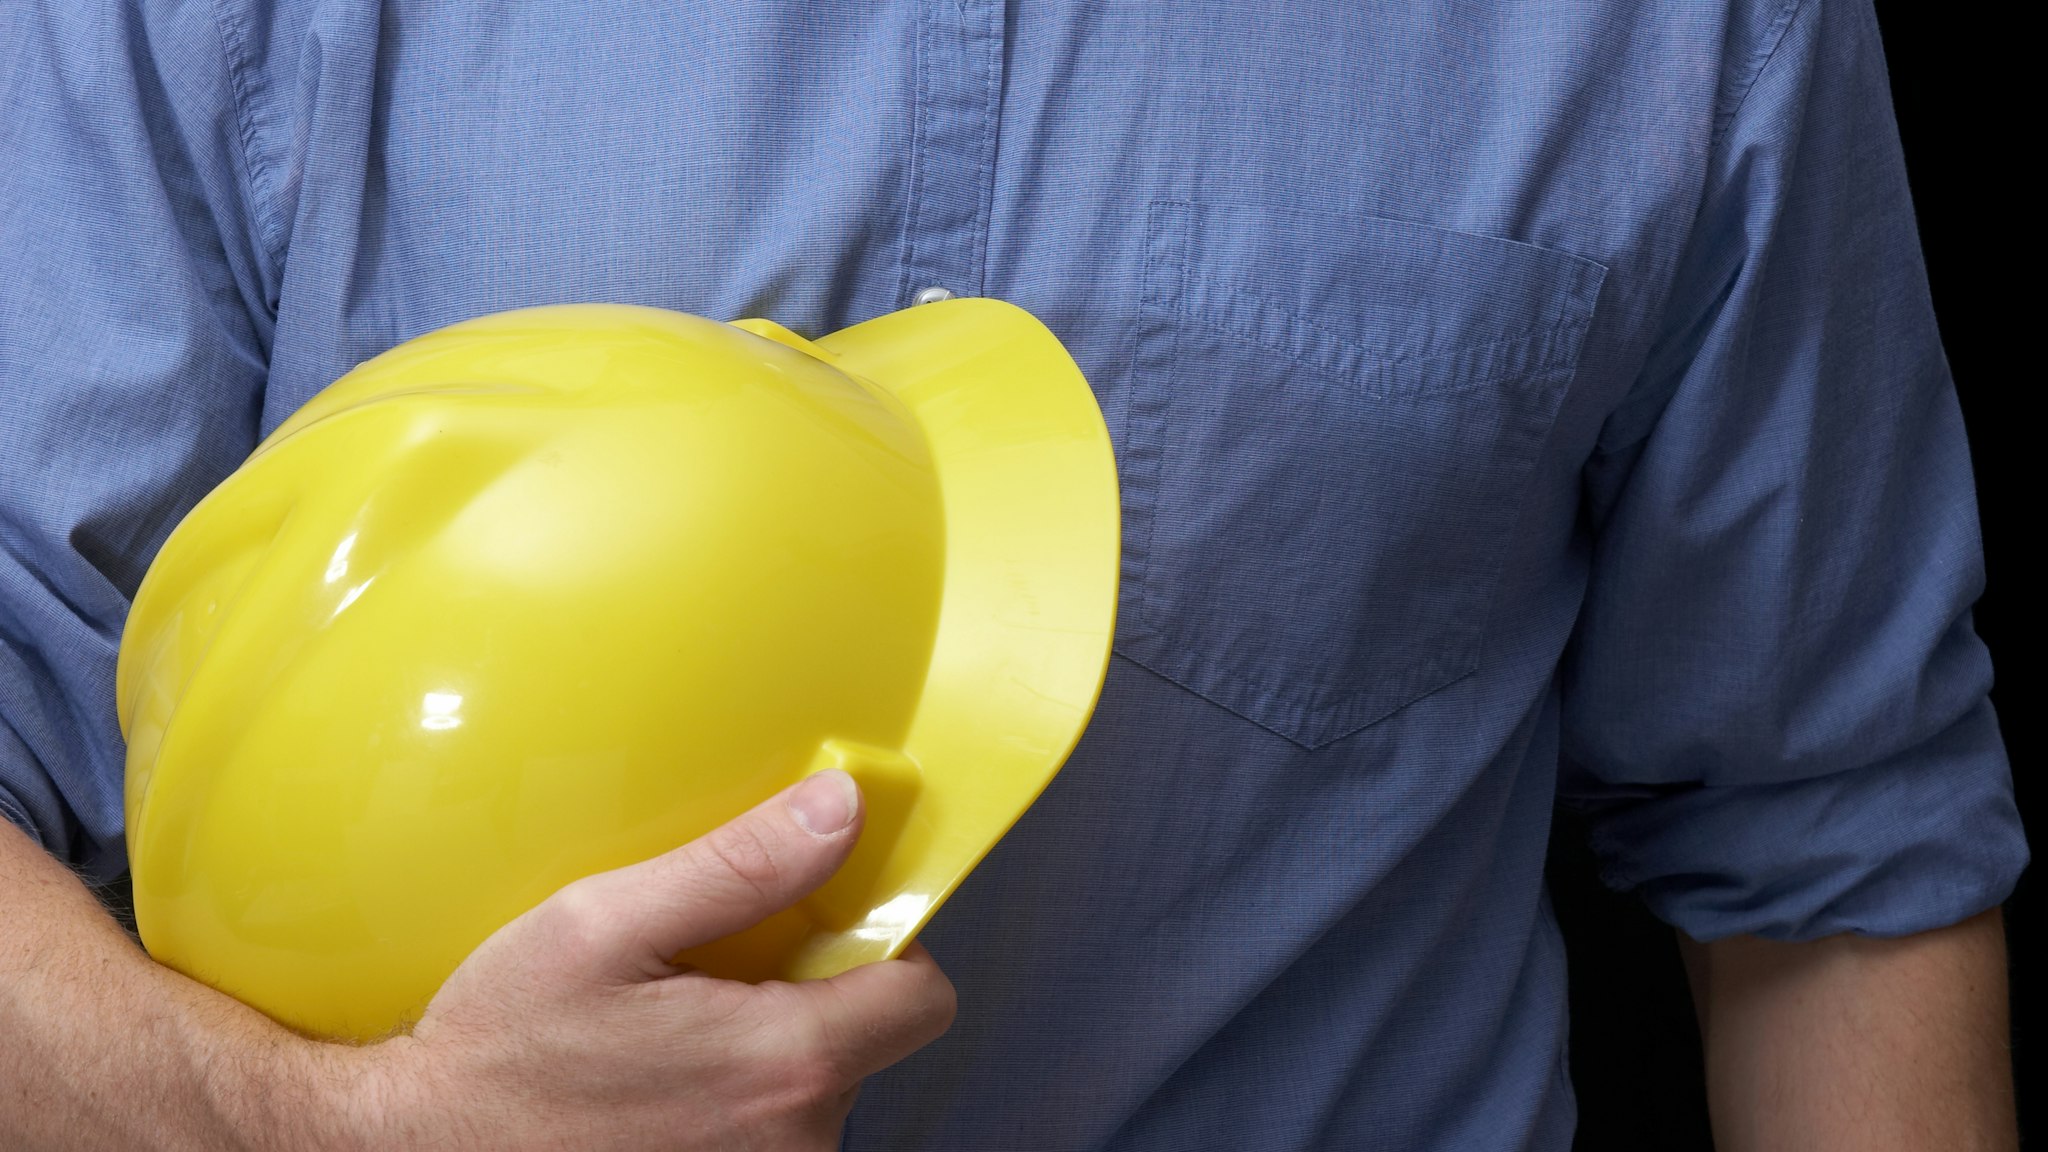 Torso of a man with yellow hardhat and blue work shirt